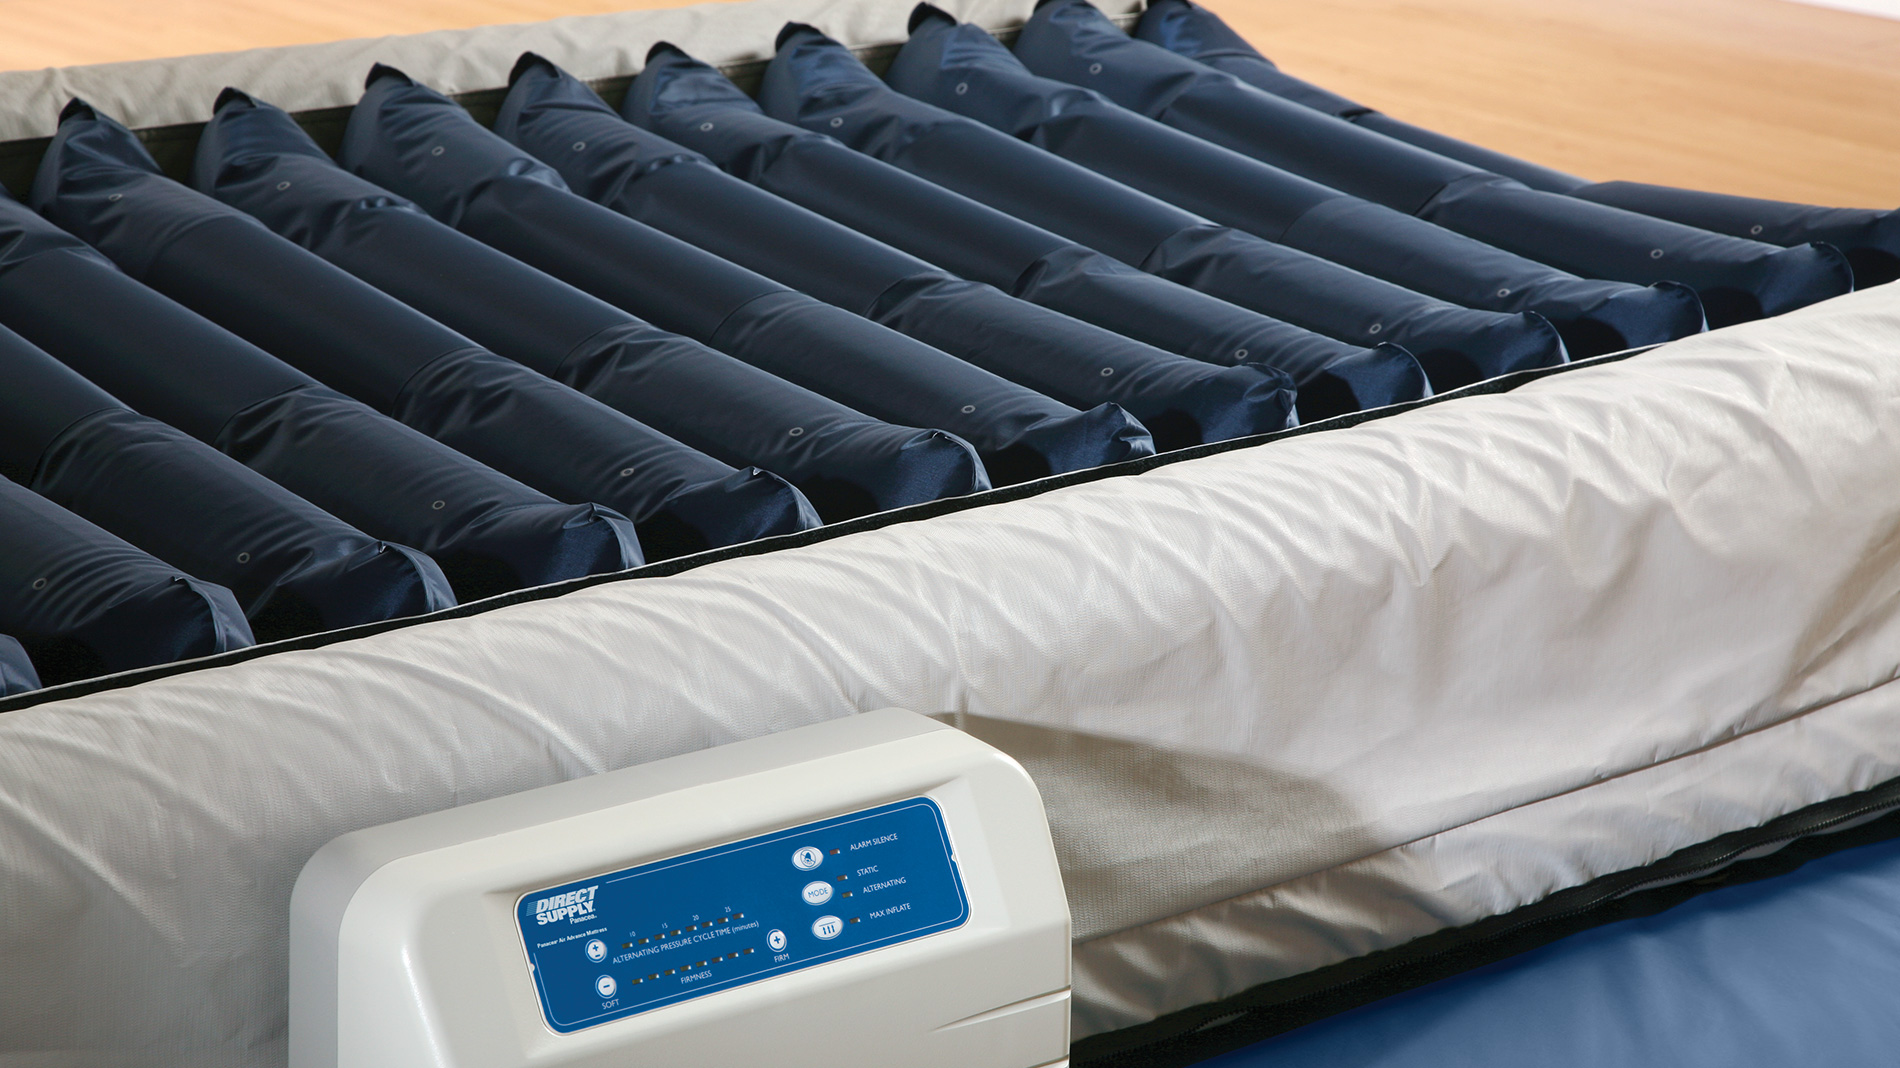 Special Considerations For Selecting An Air Mattress